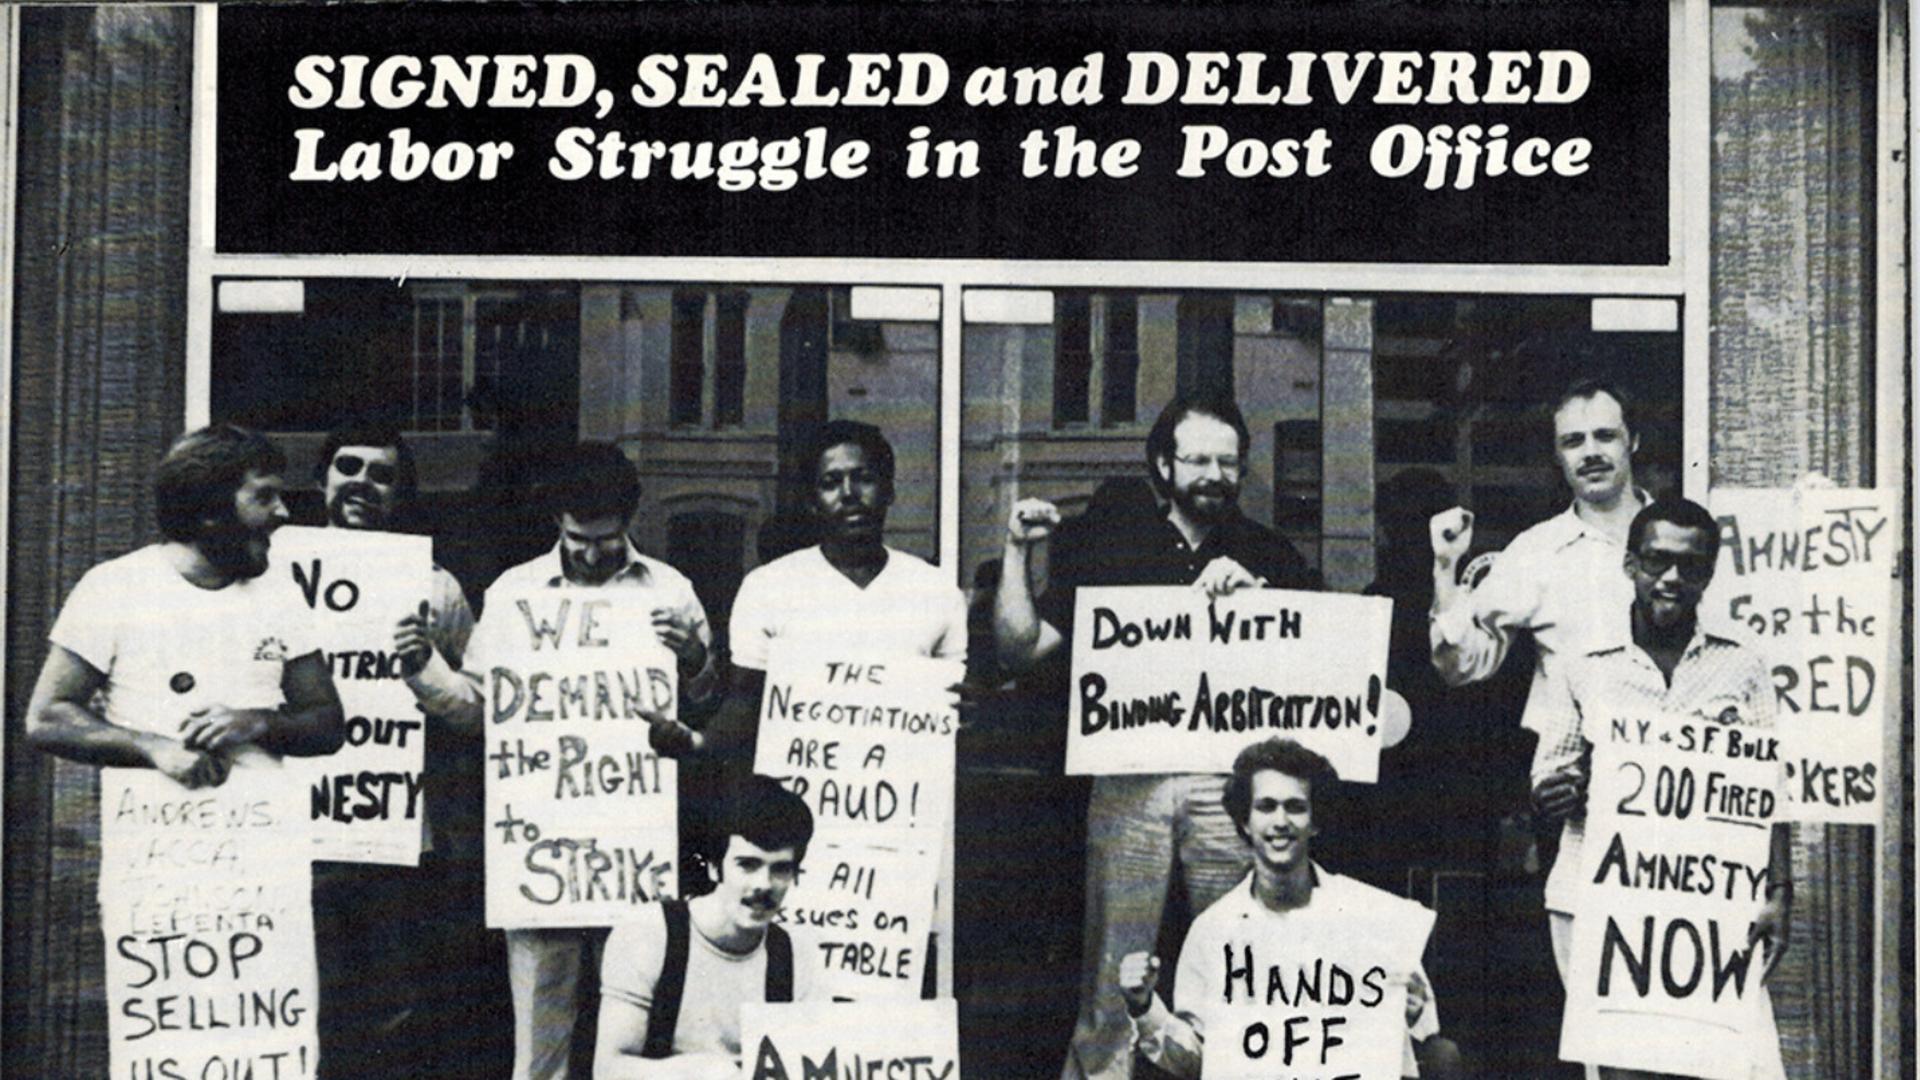 Signed, Sealed and Delivered: Labor Struggle In the Post Office